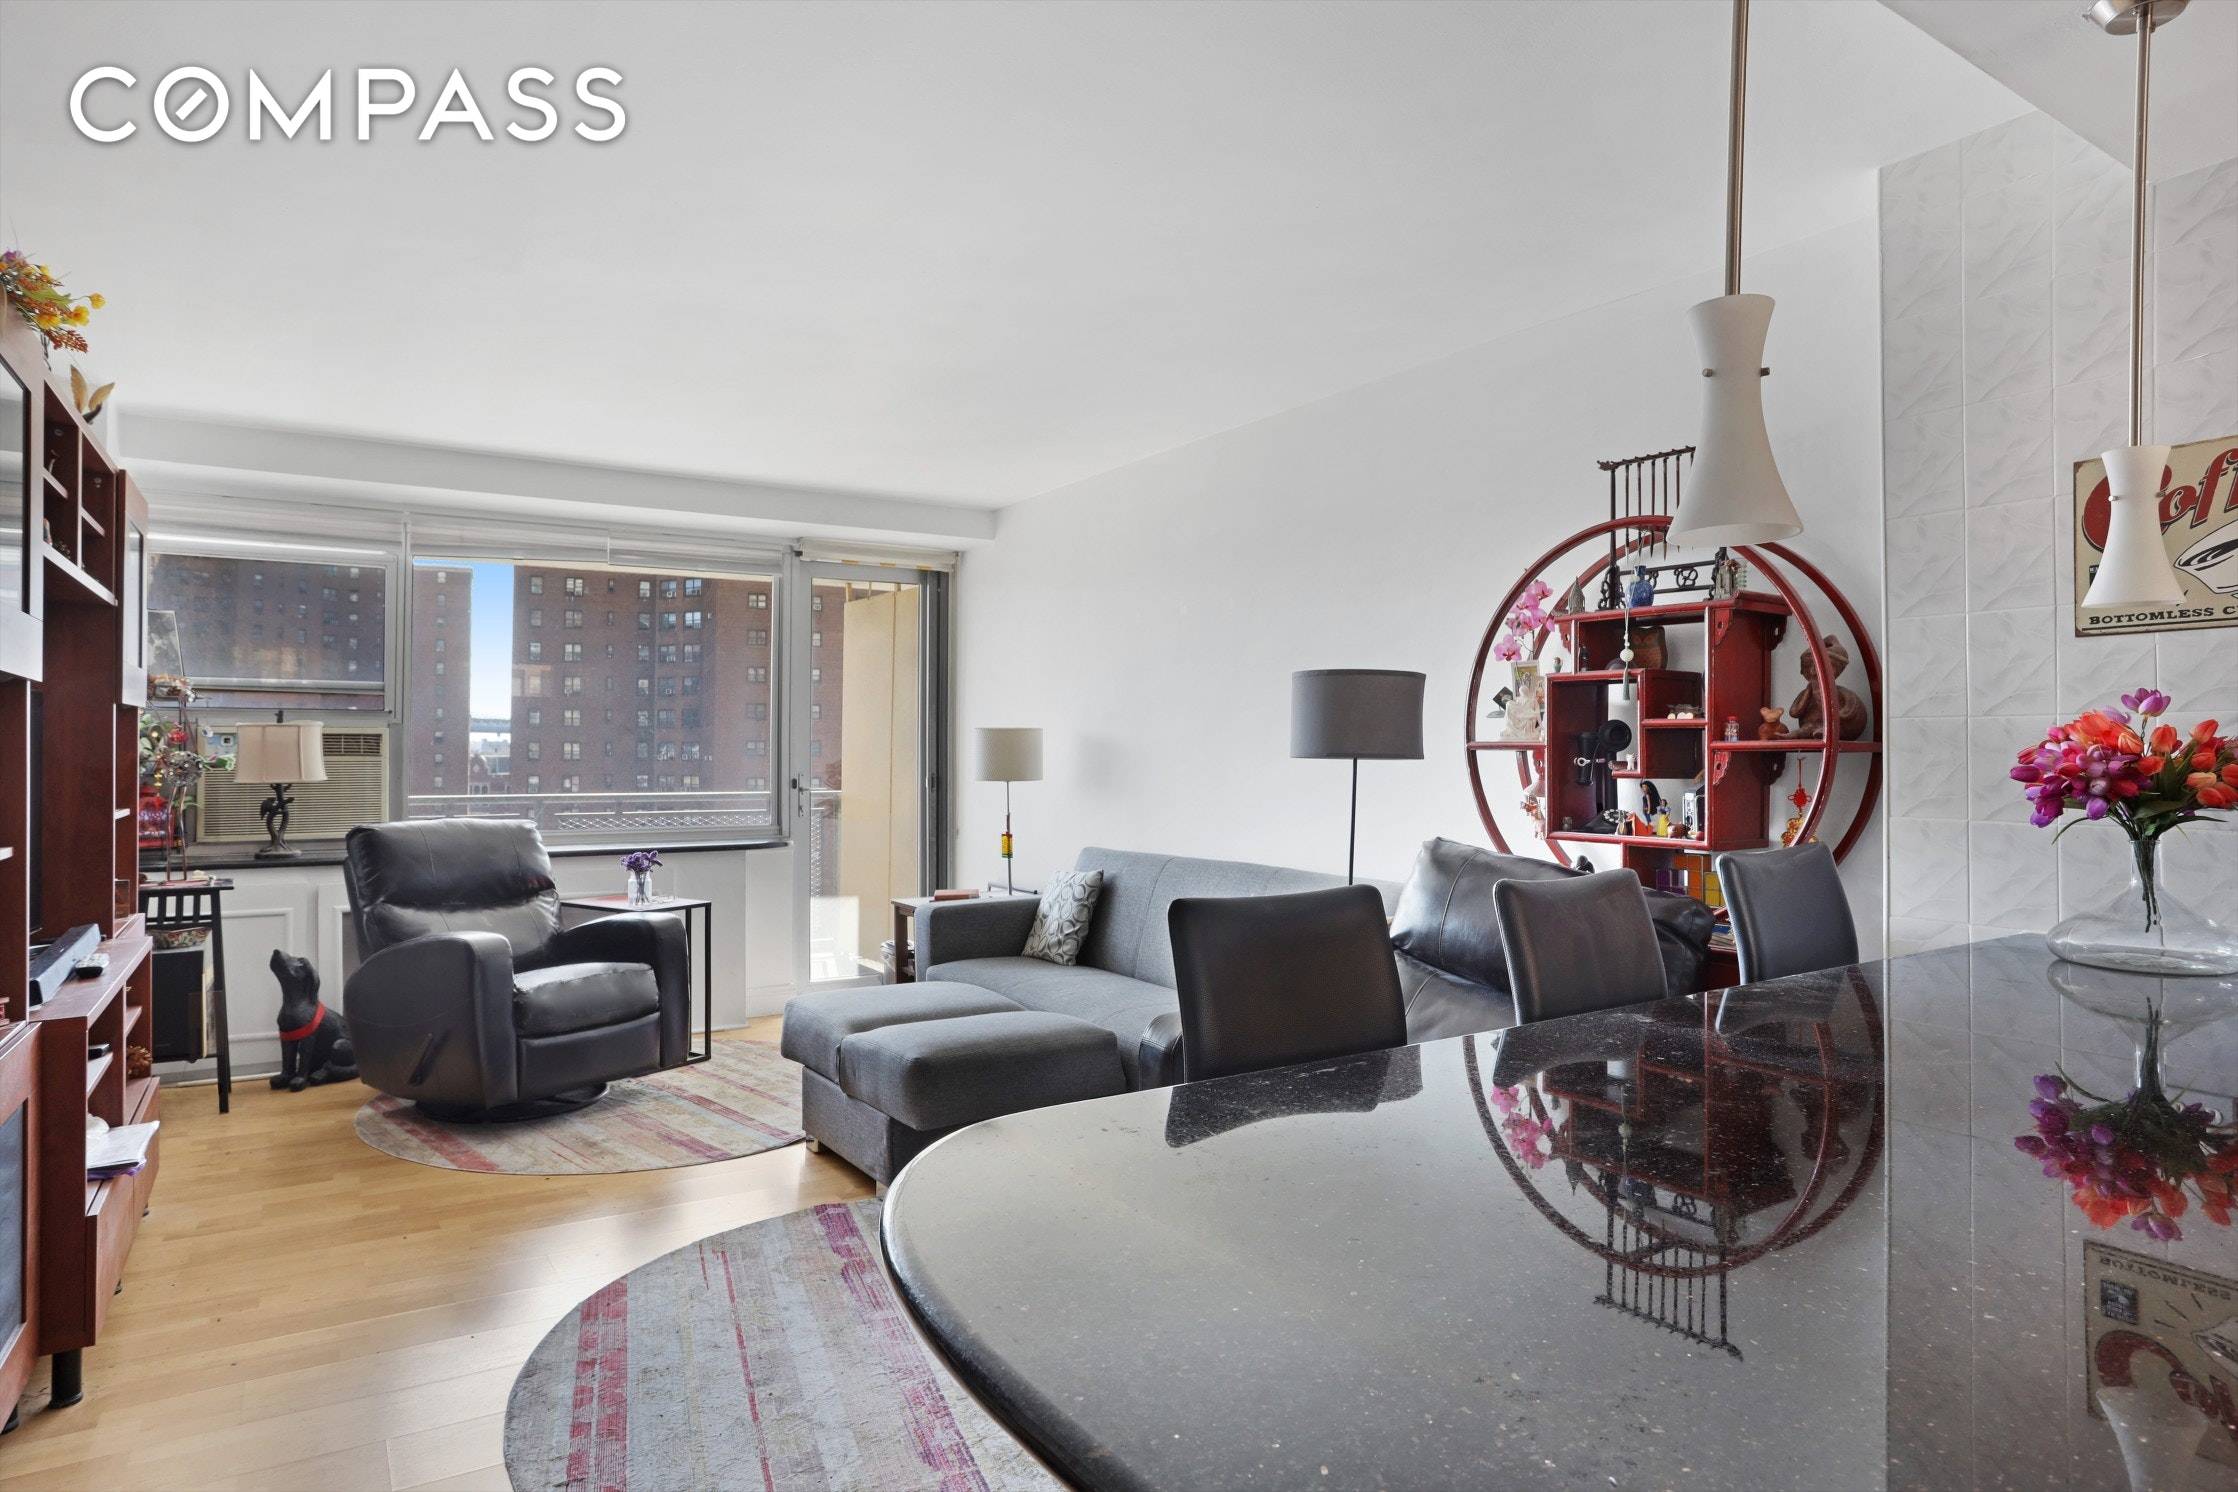 Bring your sunglasses to this large one bedroom with a balcony overlooking views of the Brooklyn Bridge.